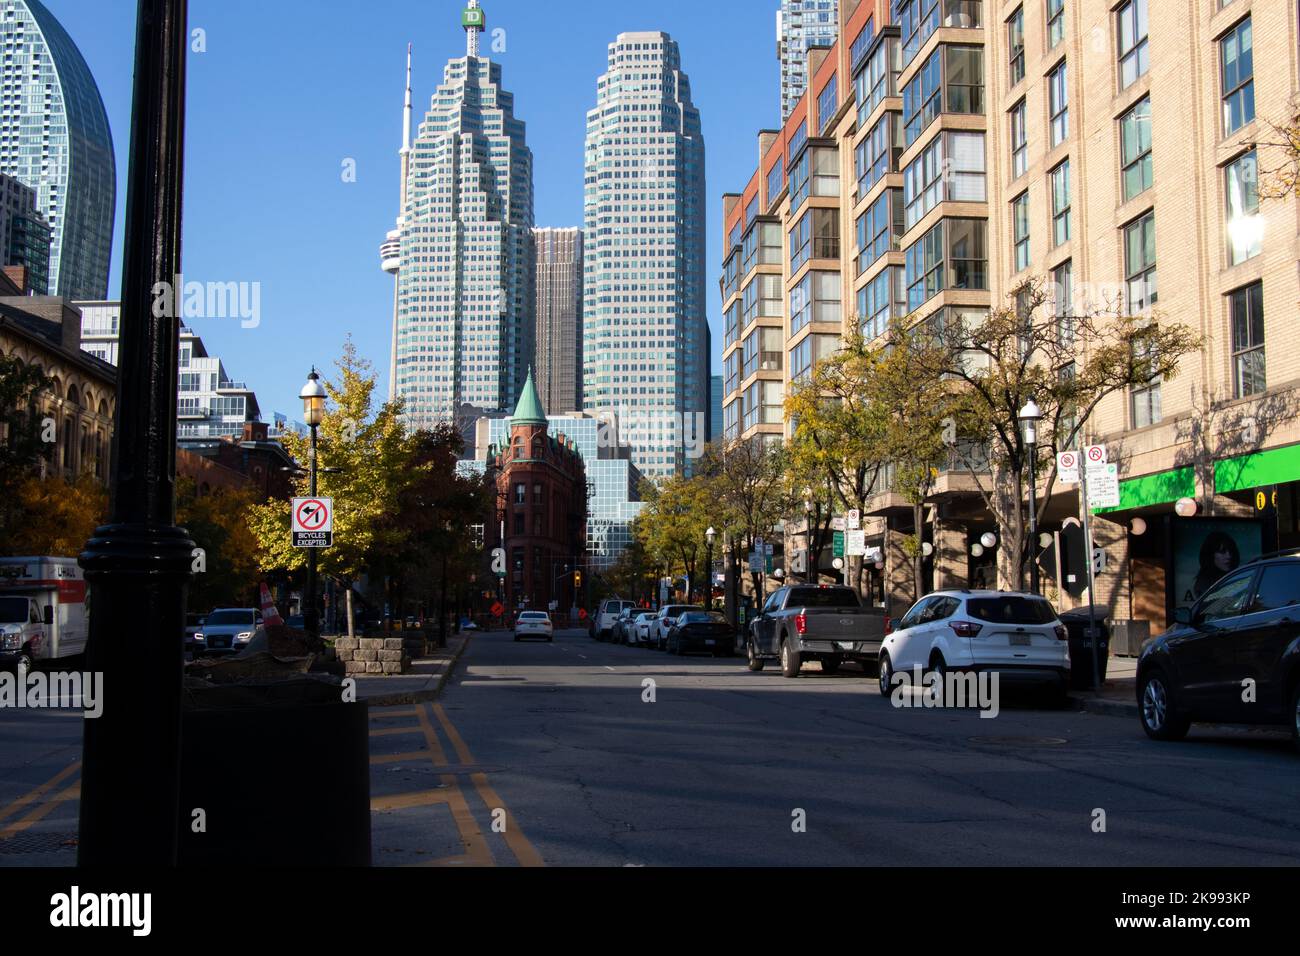 The famous Toronto skyline of Front Street is seen in the early morning, looking down the street at the famous Gooderham Building on a fall day. Stock Photo